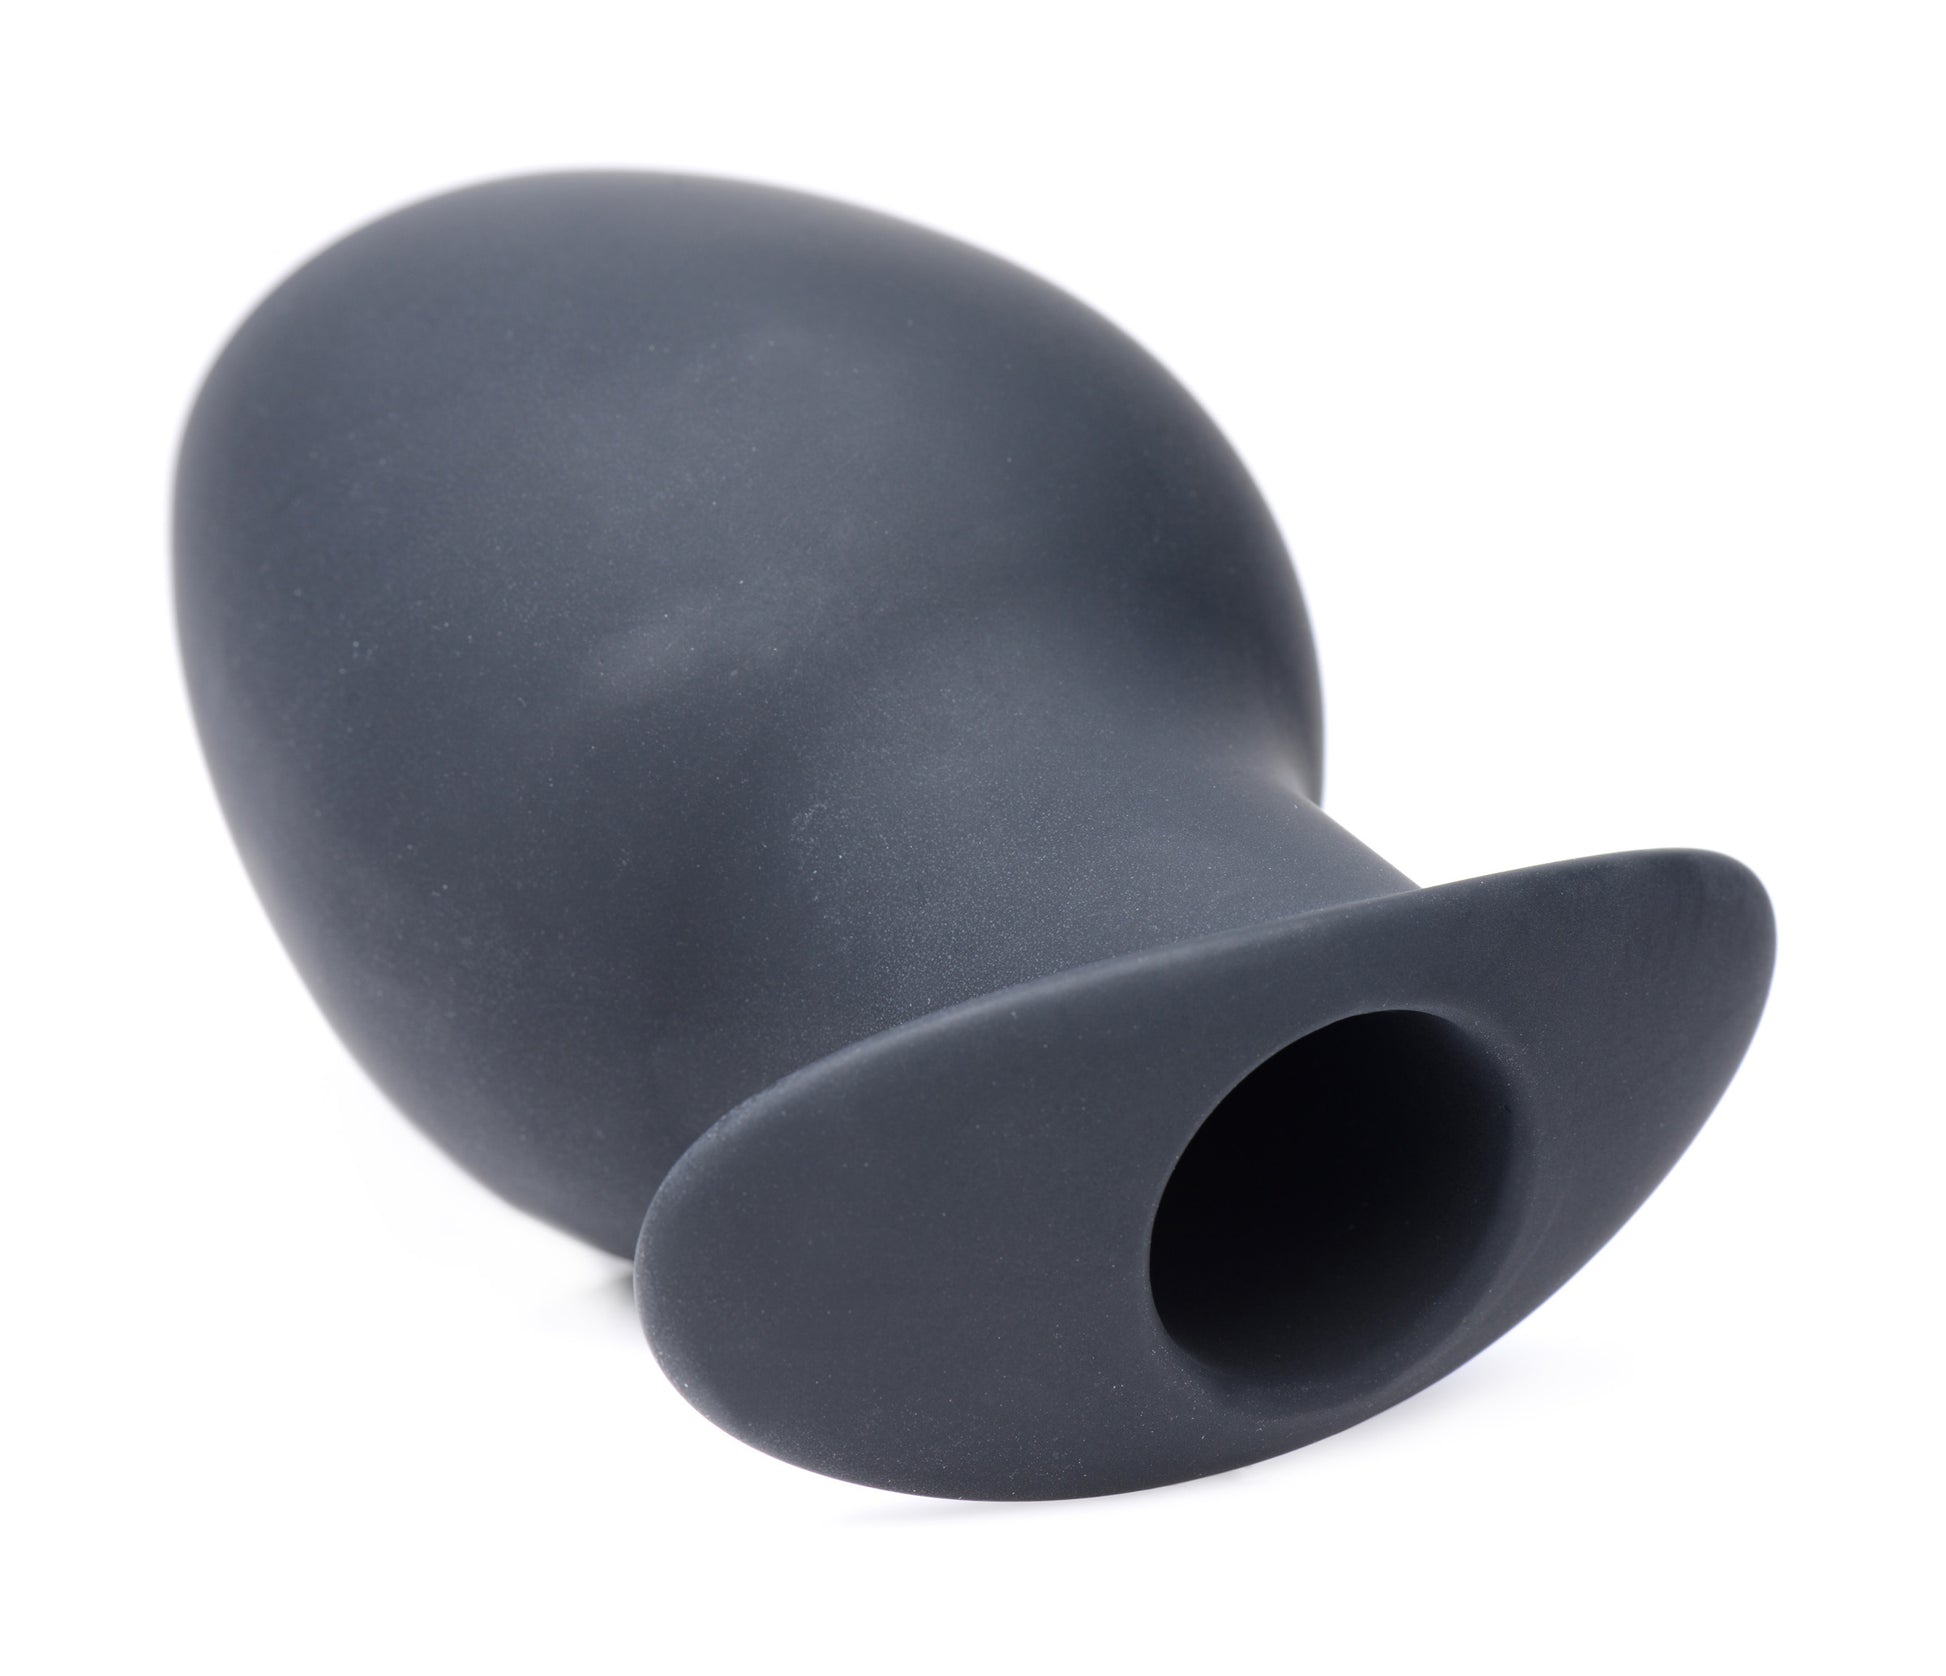 Ass Goblet Silicone Hollow Anal Plug - Large - UABDSM